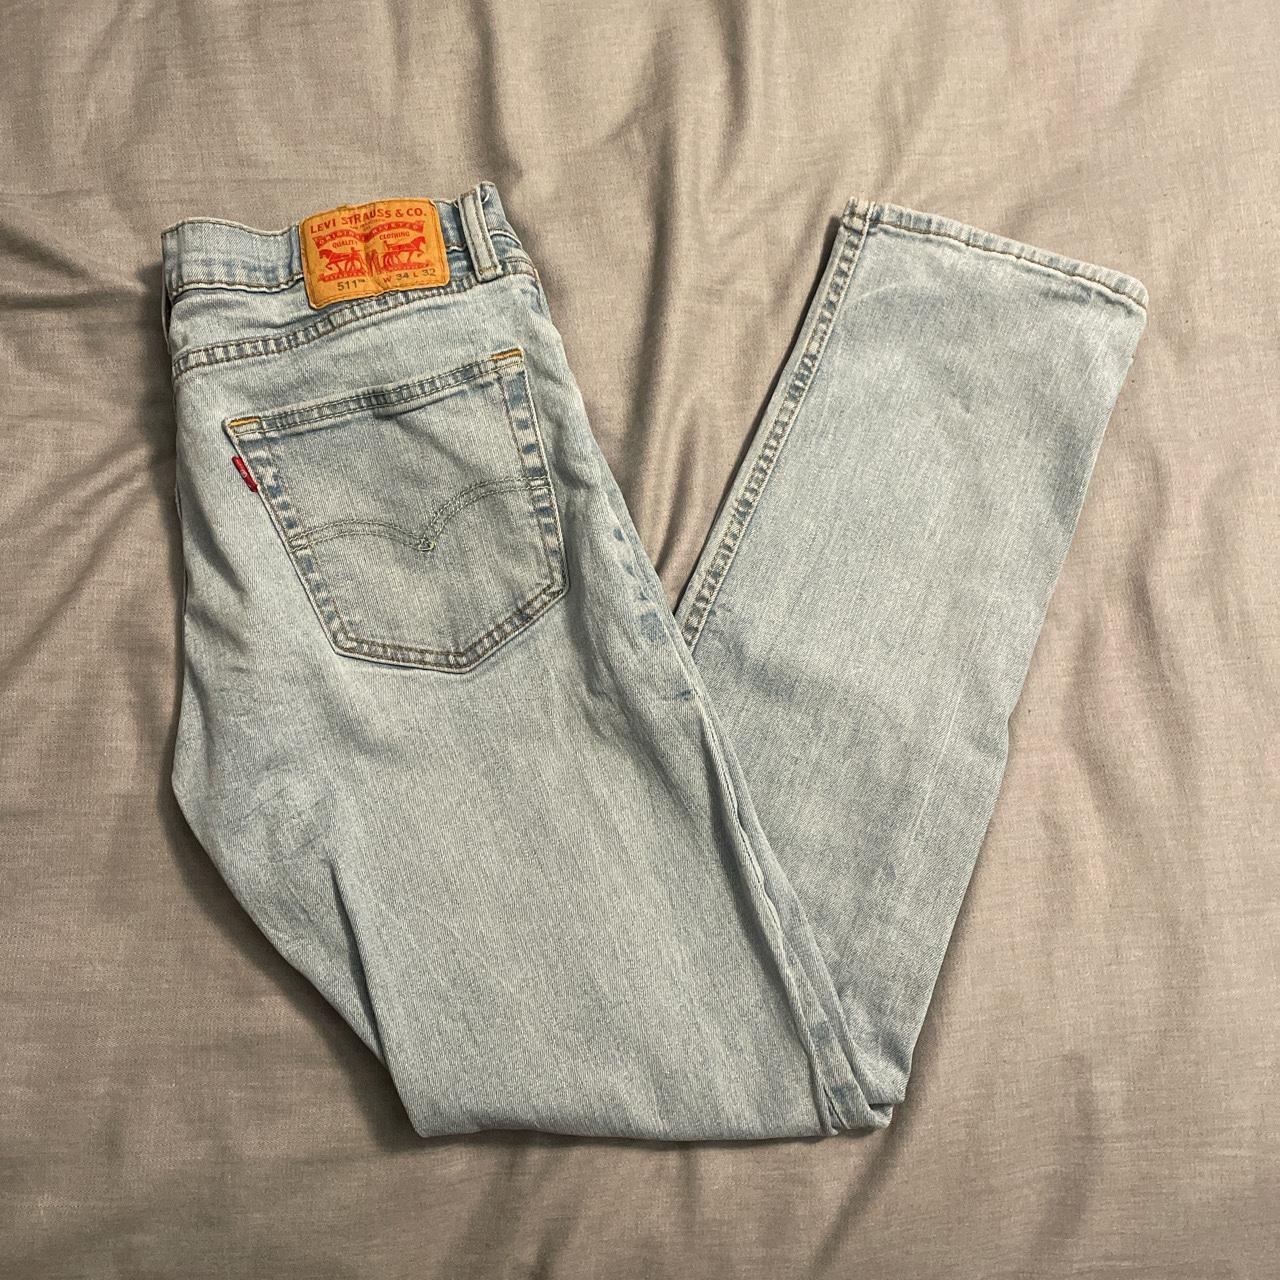 item listed by homelessthrift